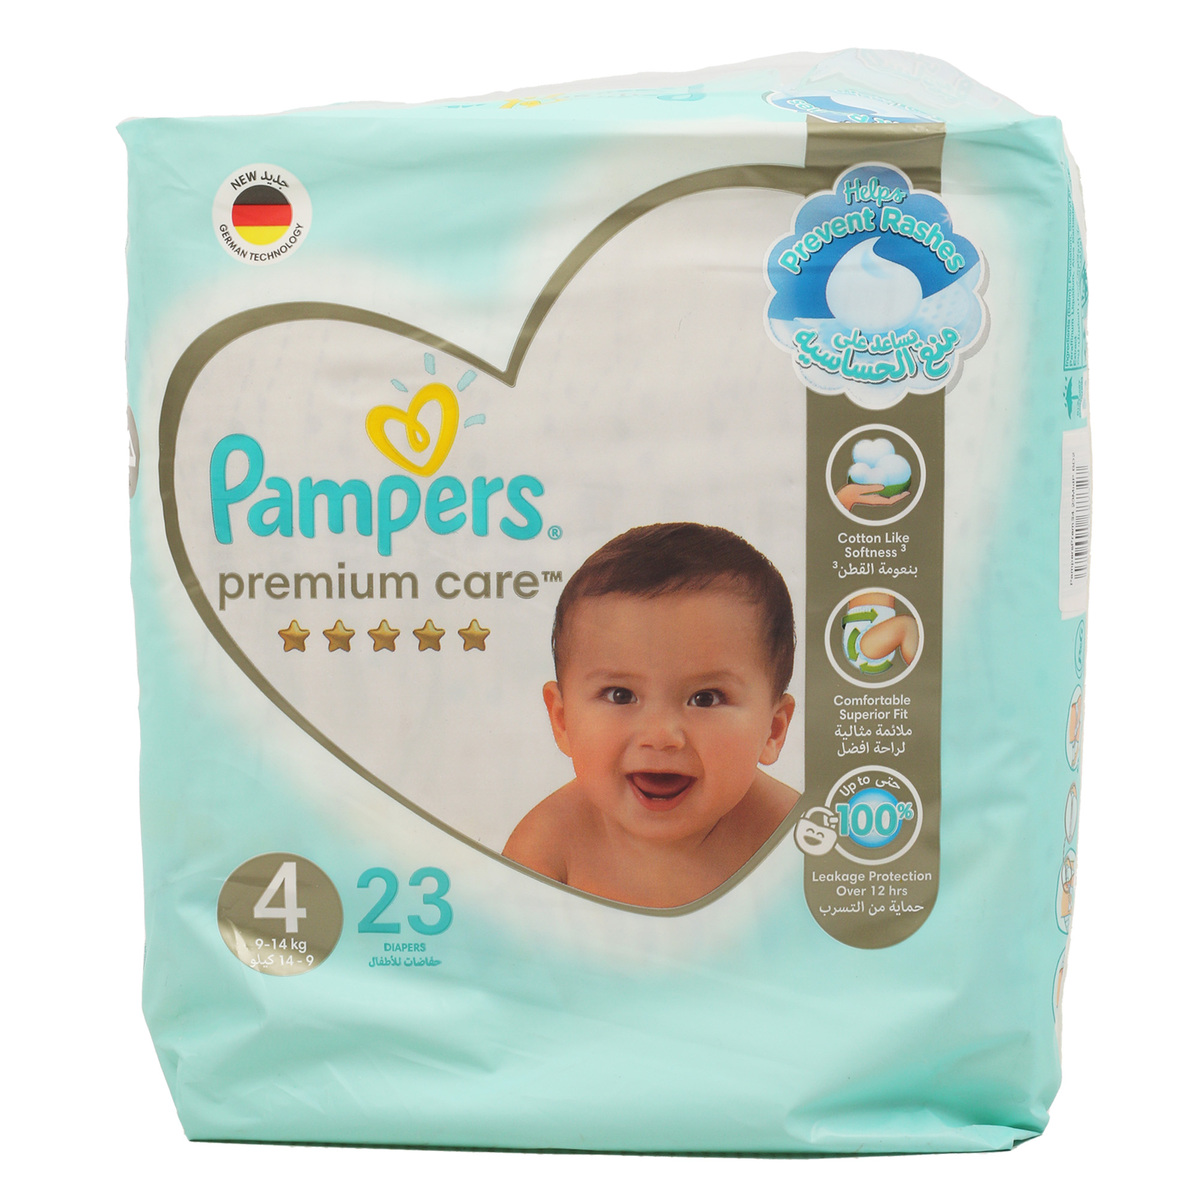 Pampers Premium Care Diaper Extra Absorb Size 4, 9-14kg Value Pack 23pcs